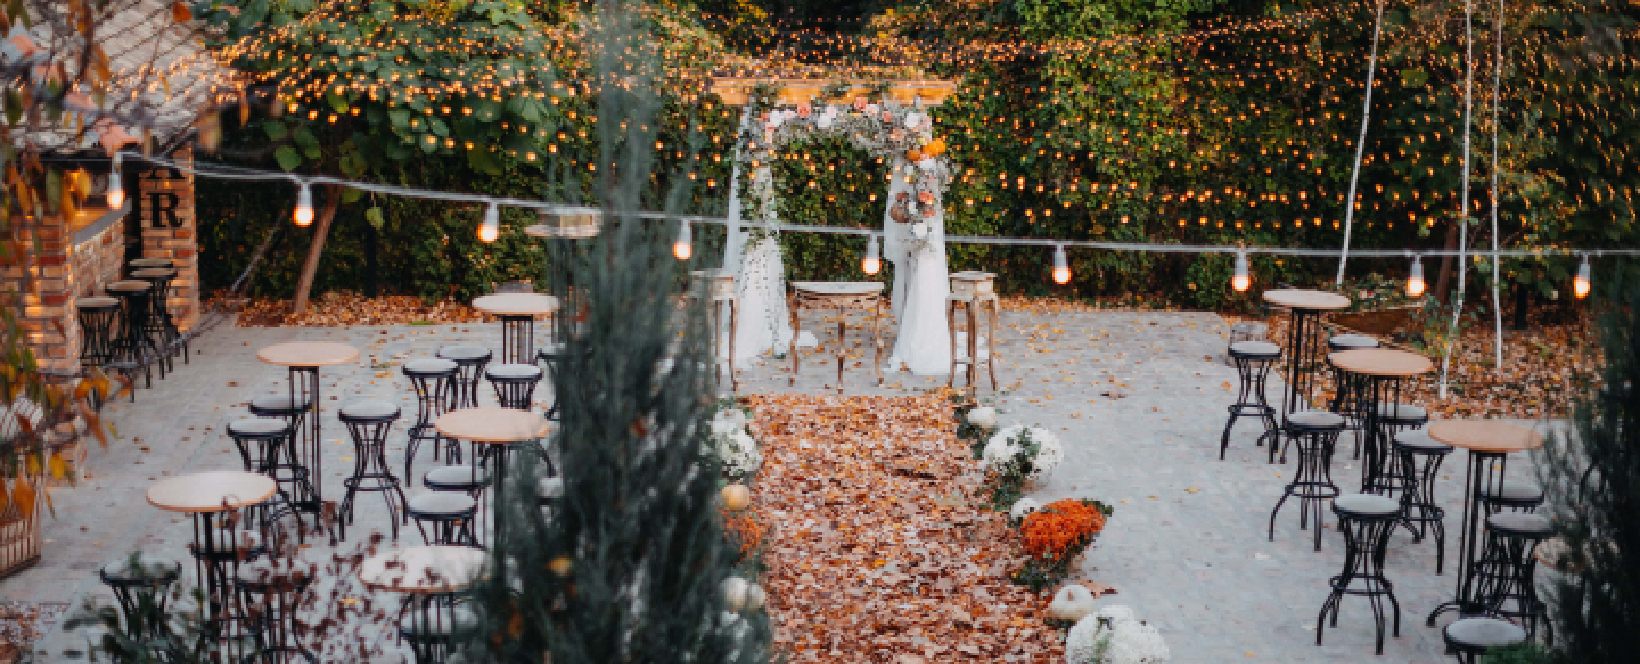 Warm Up To The Idea Of An Outdoor Winter Ceremony